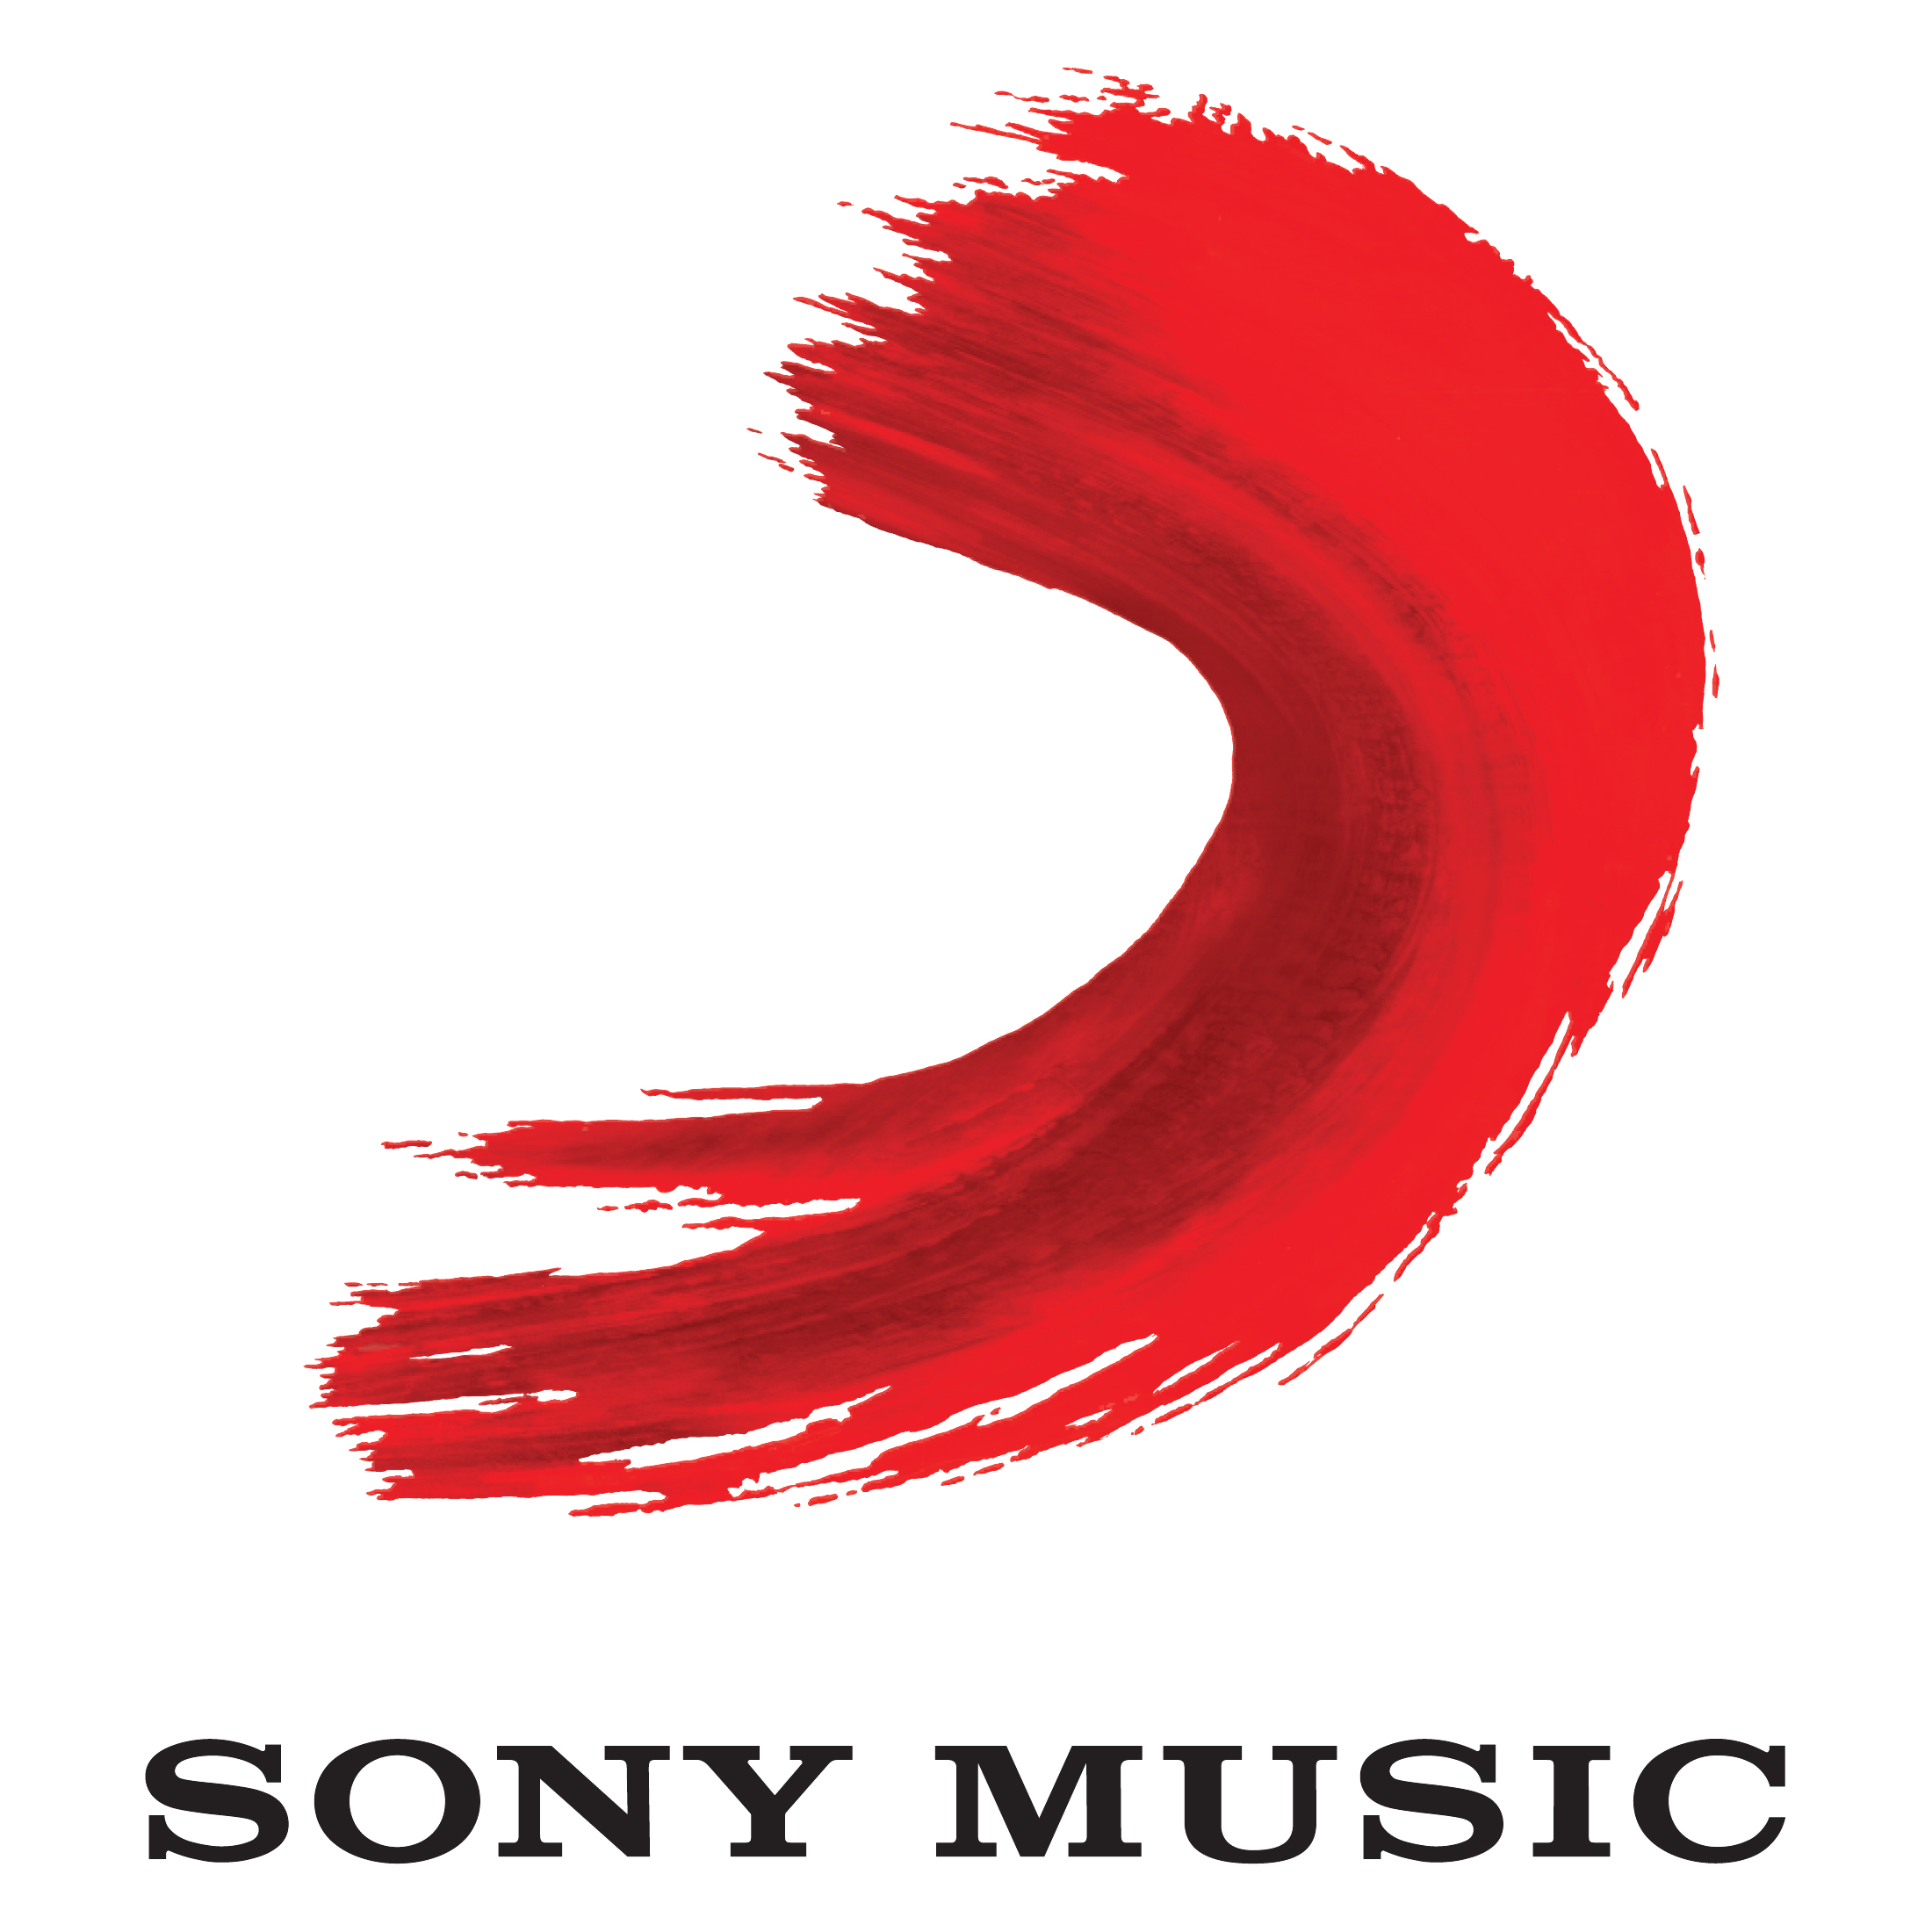 Sony Develops Real-Time Streaming Royalty Reports